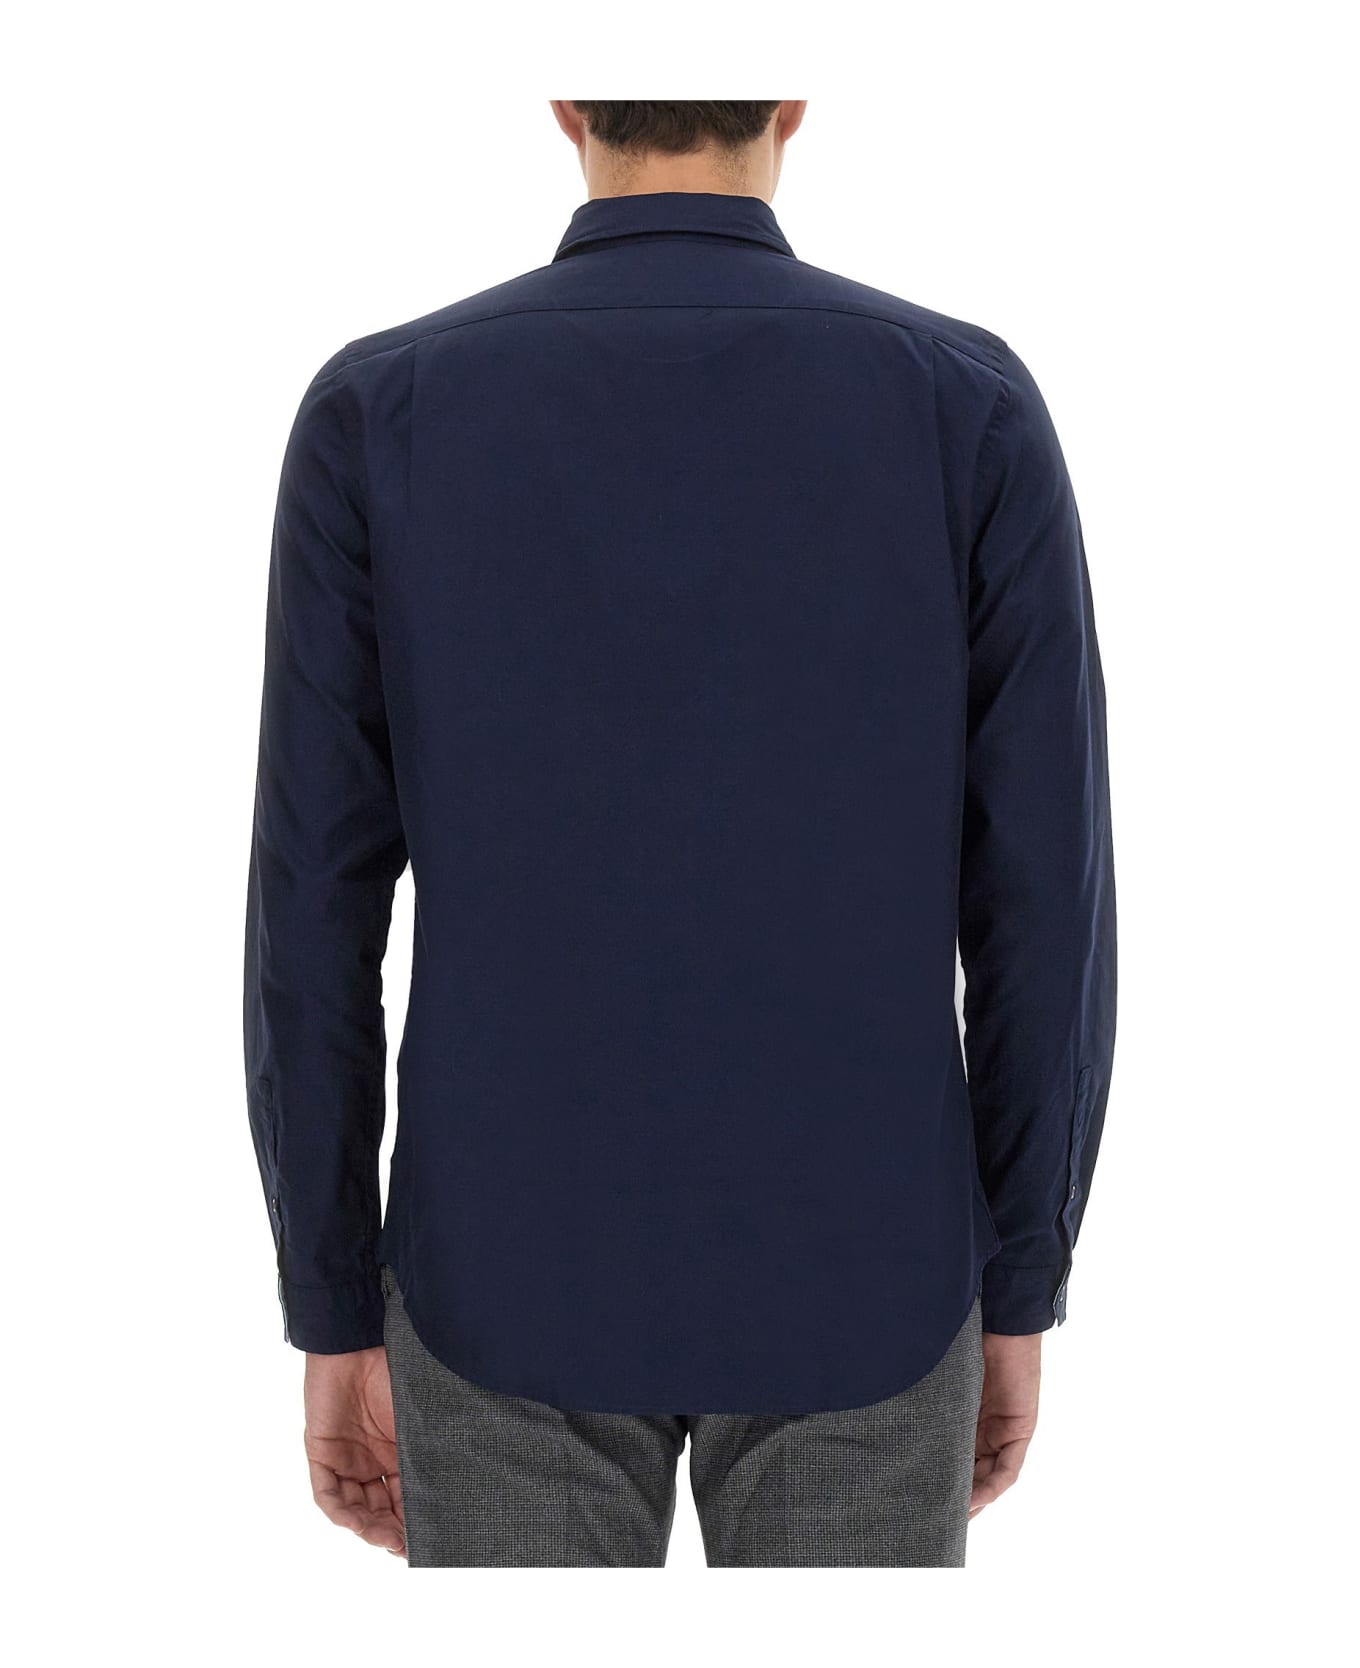 PS by Paul Smith Shirt With Patch - BLU